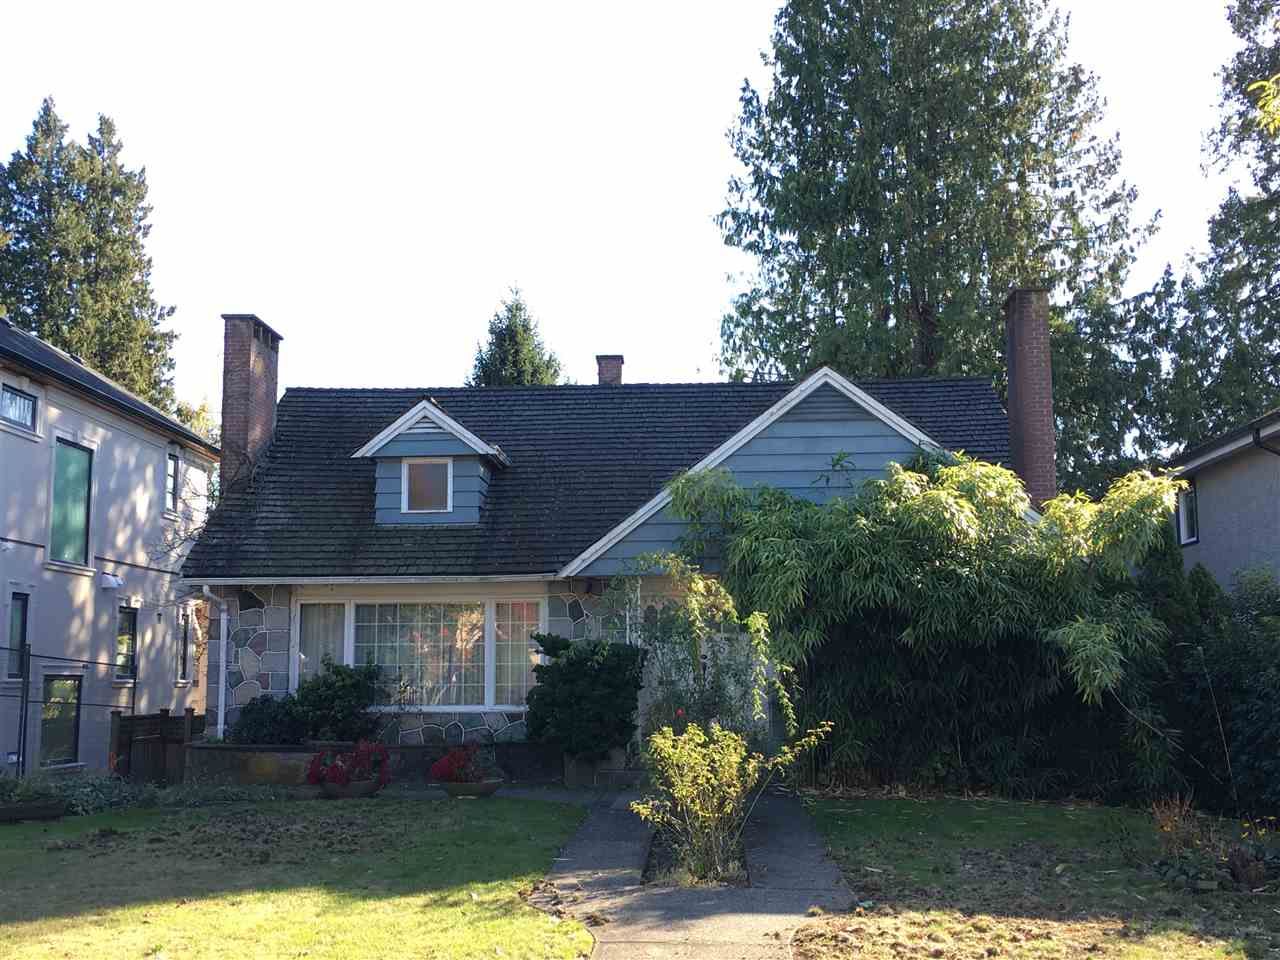 Main Photo: 1768 W 61ST Avenue in Vancouver: South Granville House for sale (Vancouver West)  : MLS®# R2120423